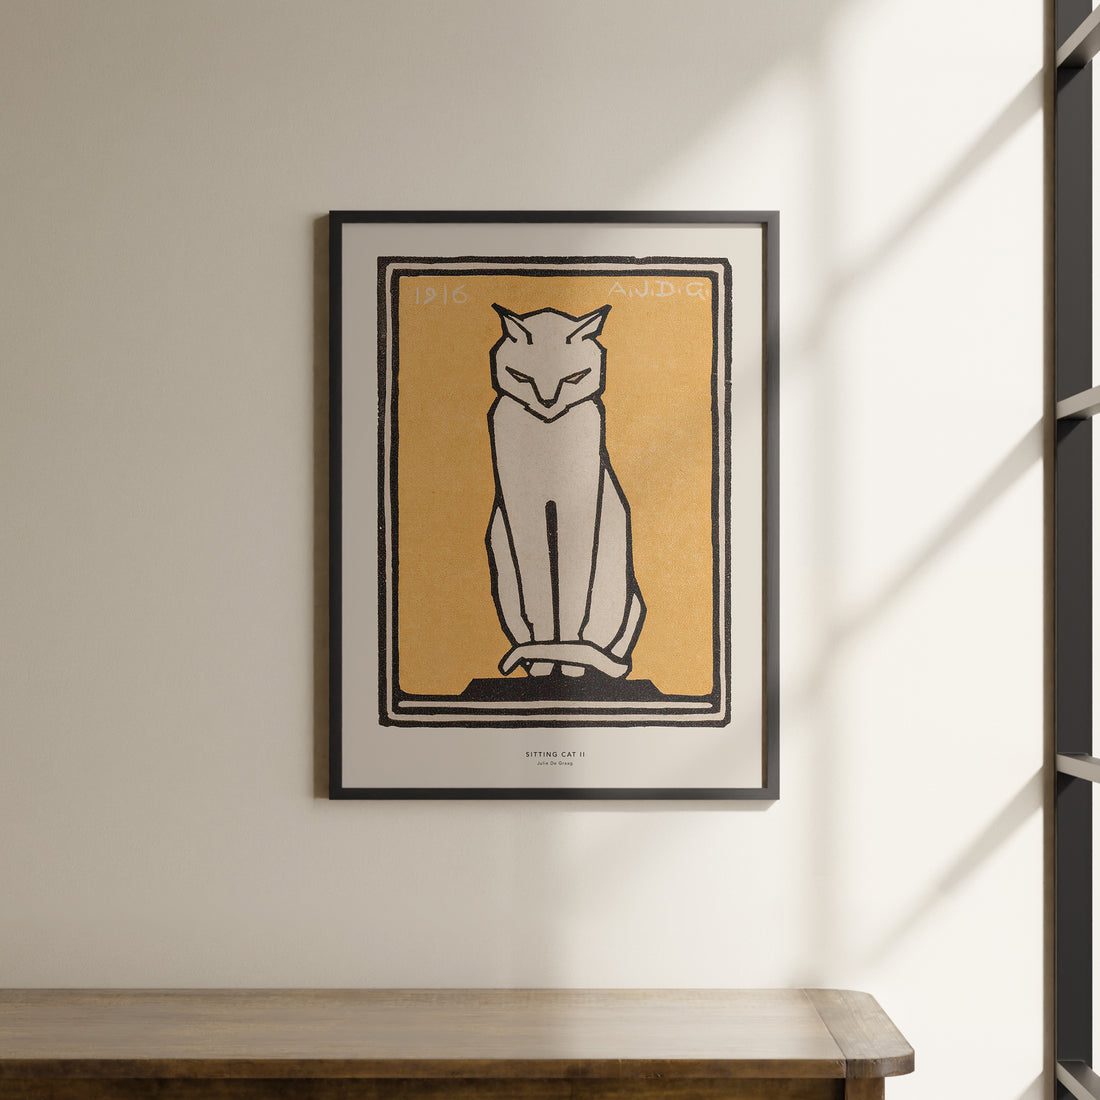 a picture of a cat hanging on a wall